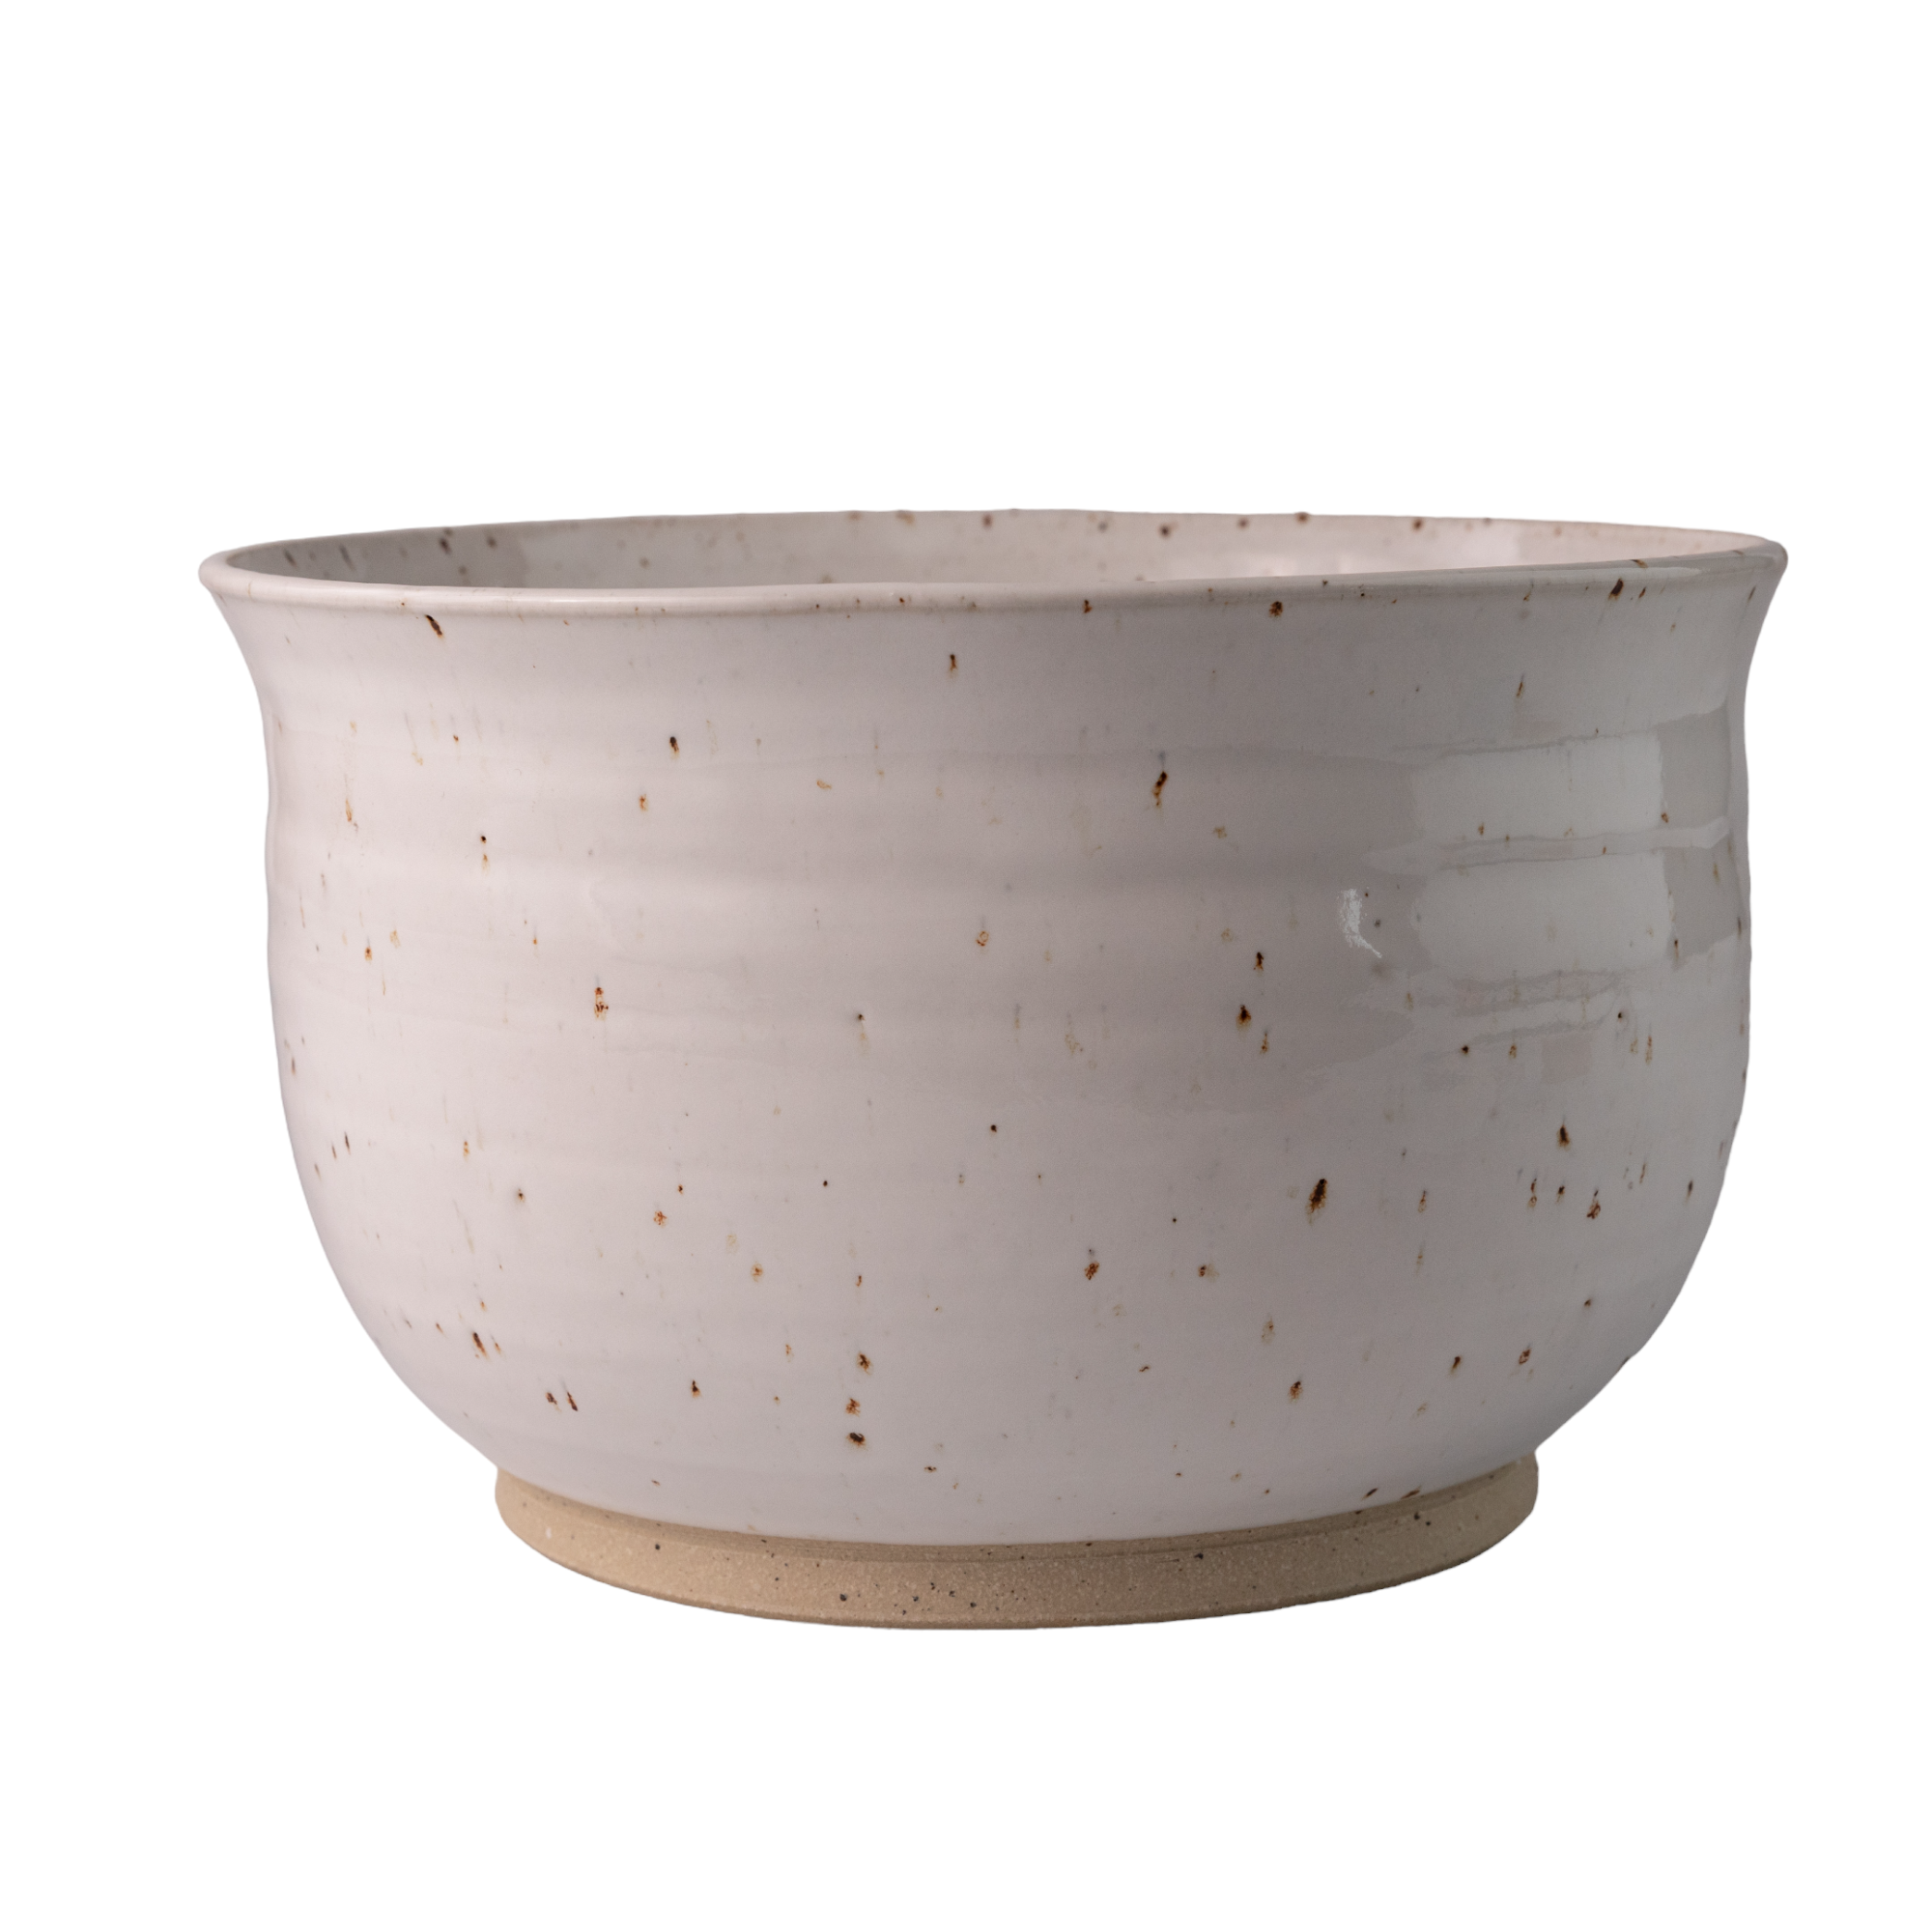 Large flecked bowl with lip